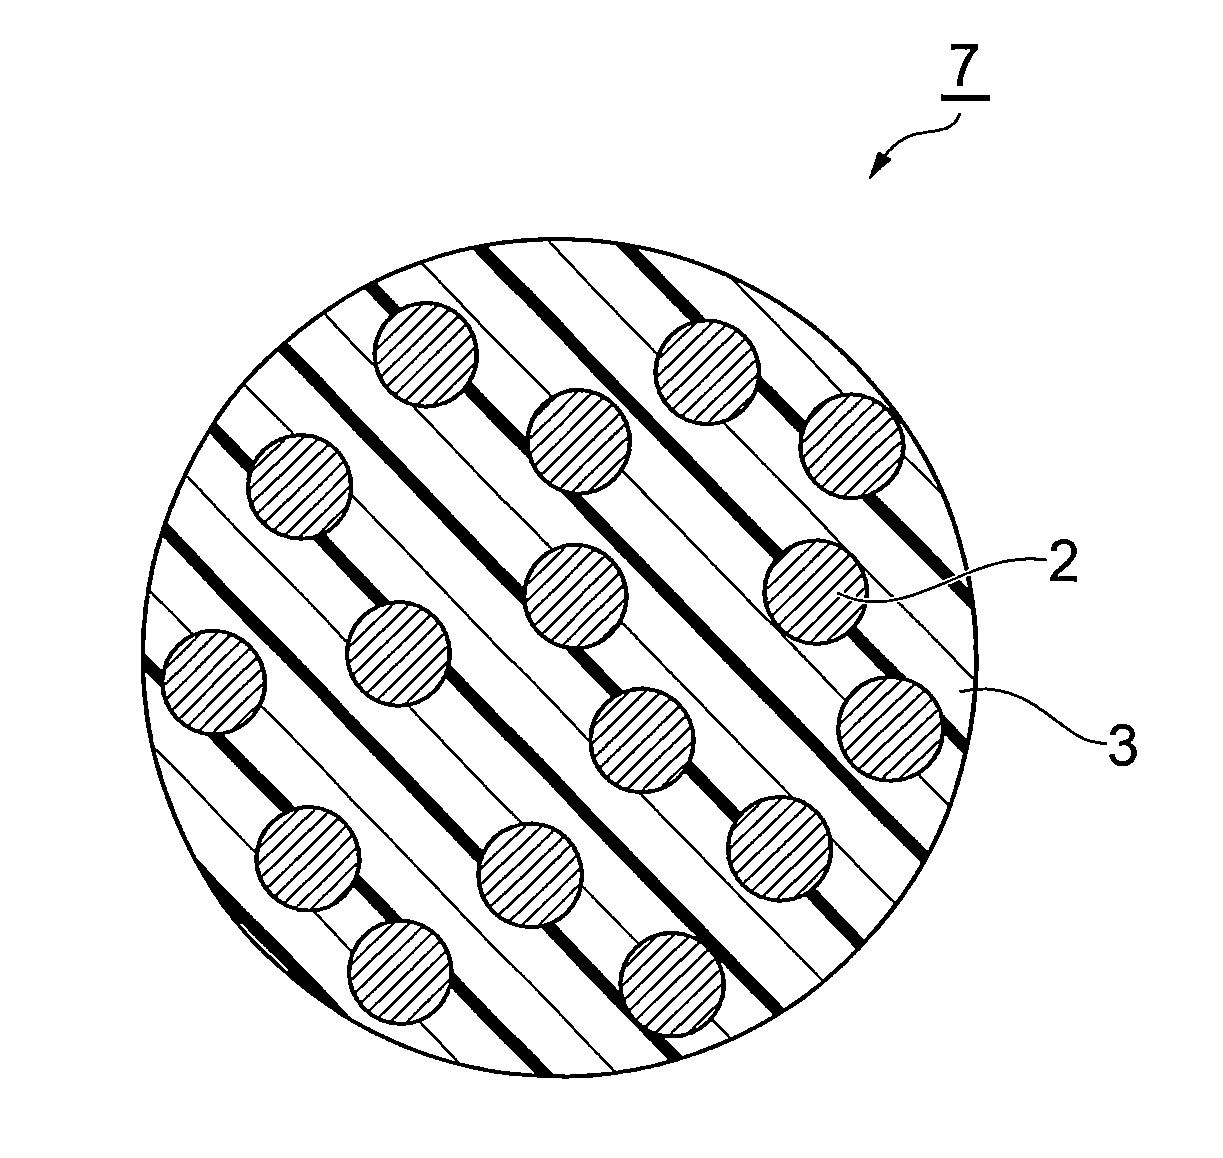 Anisotropic conductive particles